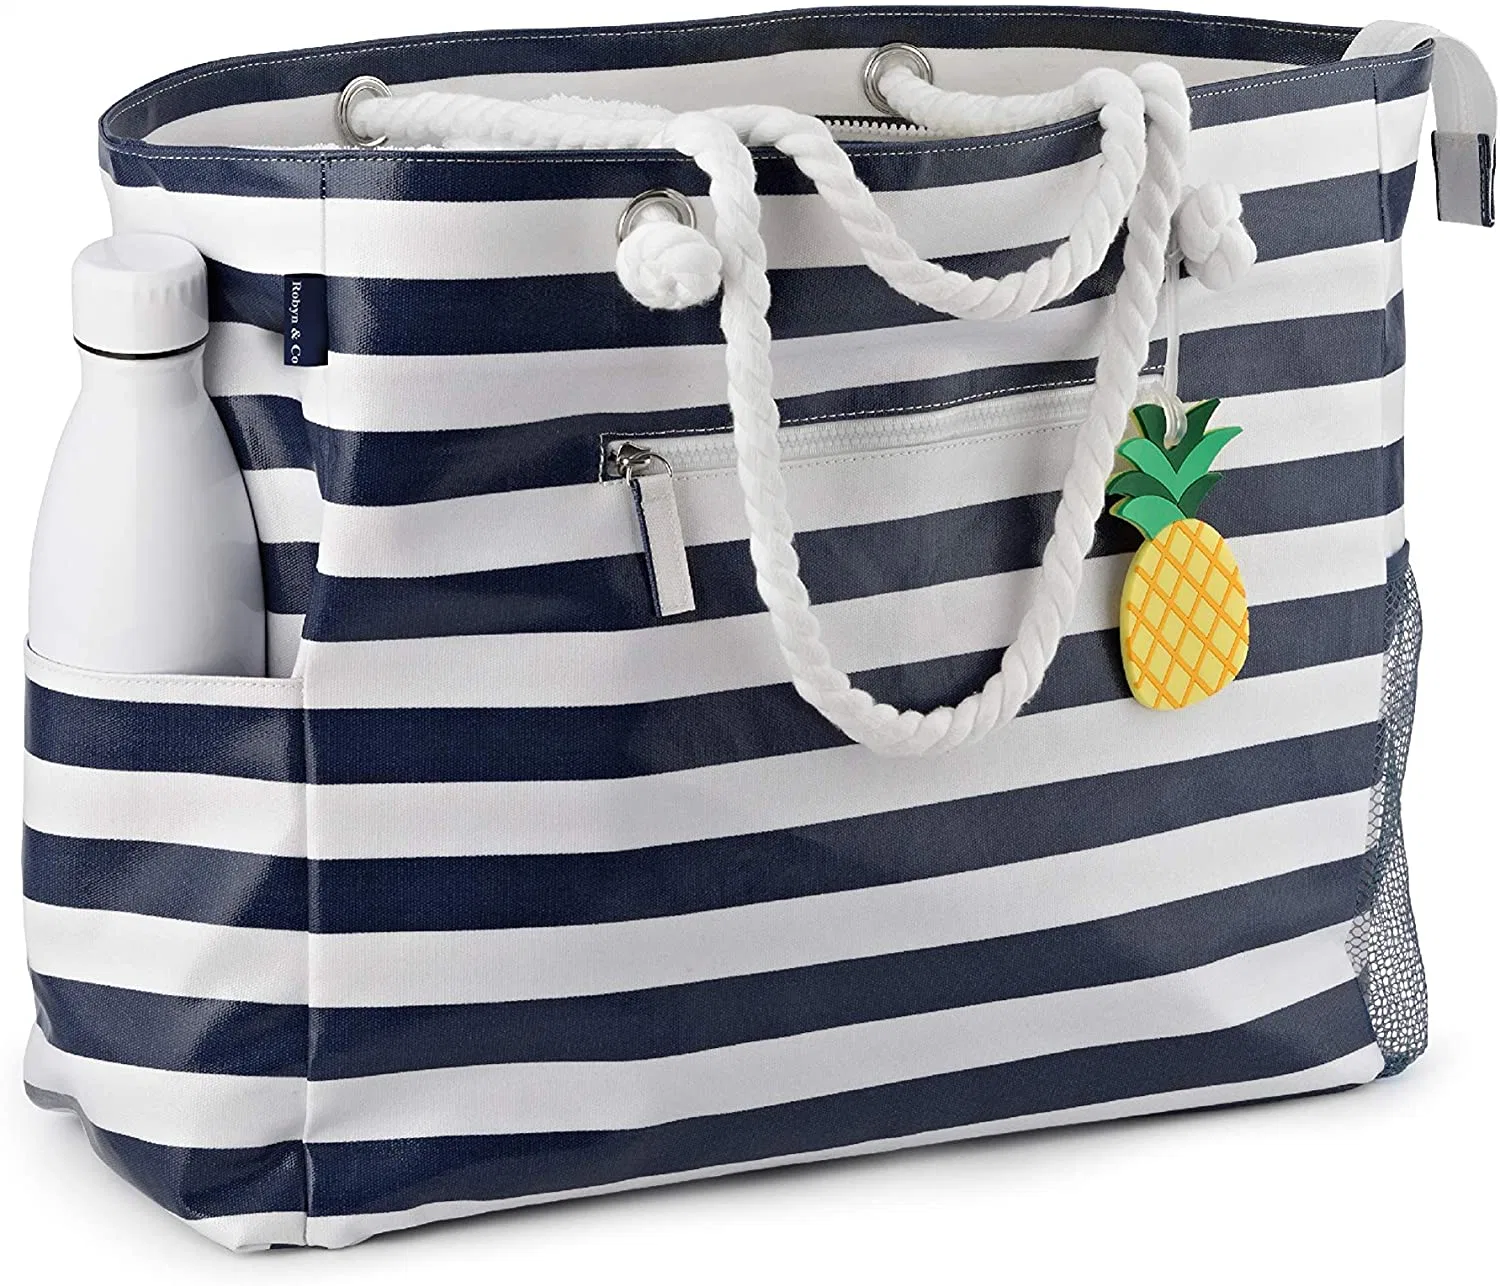 2021 Large Beach Bag Waterproof Canvas Beach Tote with Top Zipper-6 Pockets